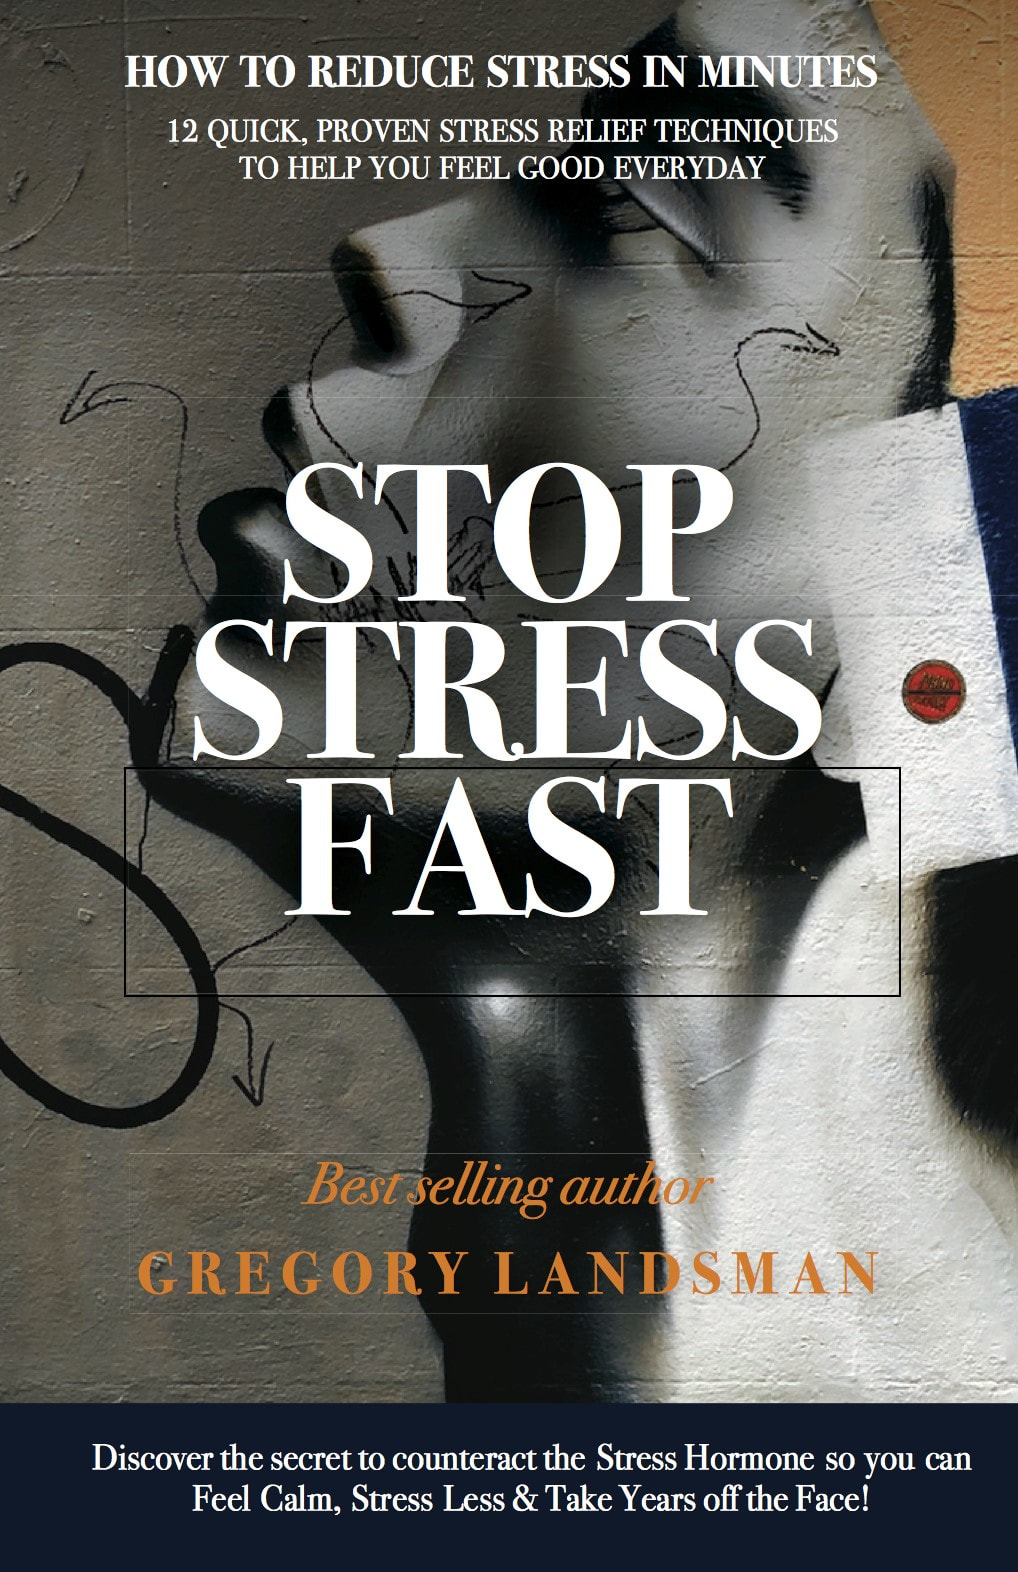 STOP STRESS FAST by Gregory Landsman